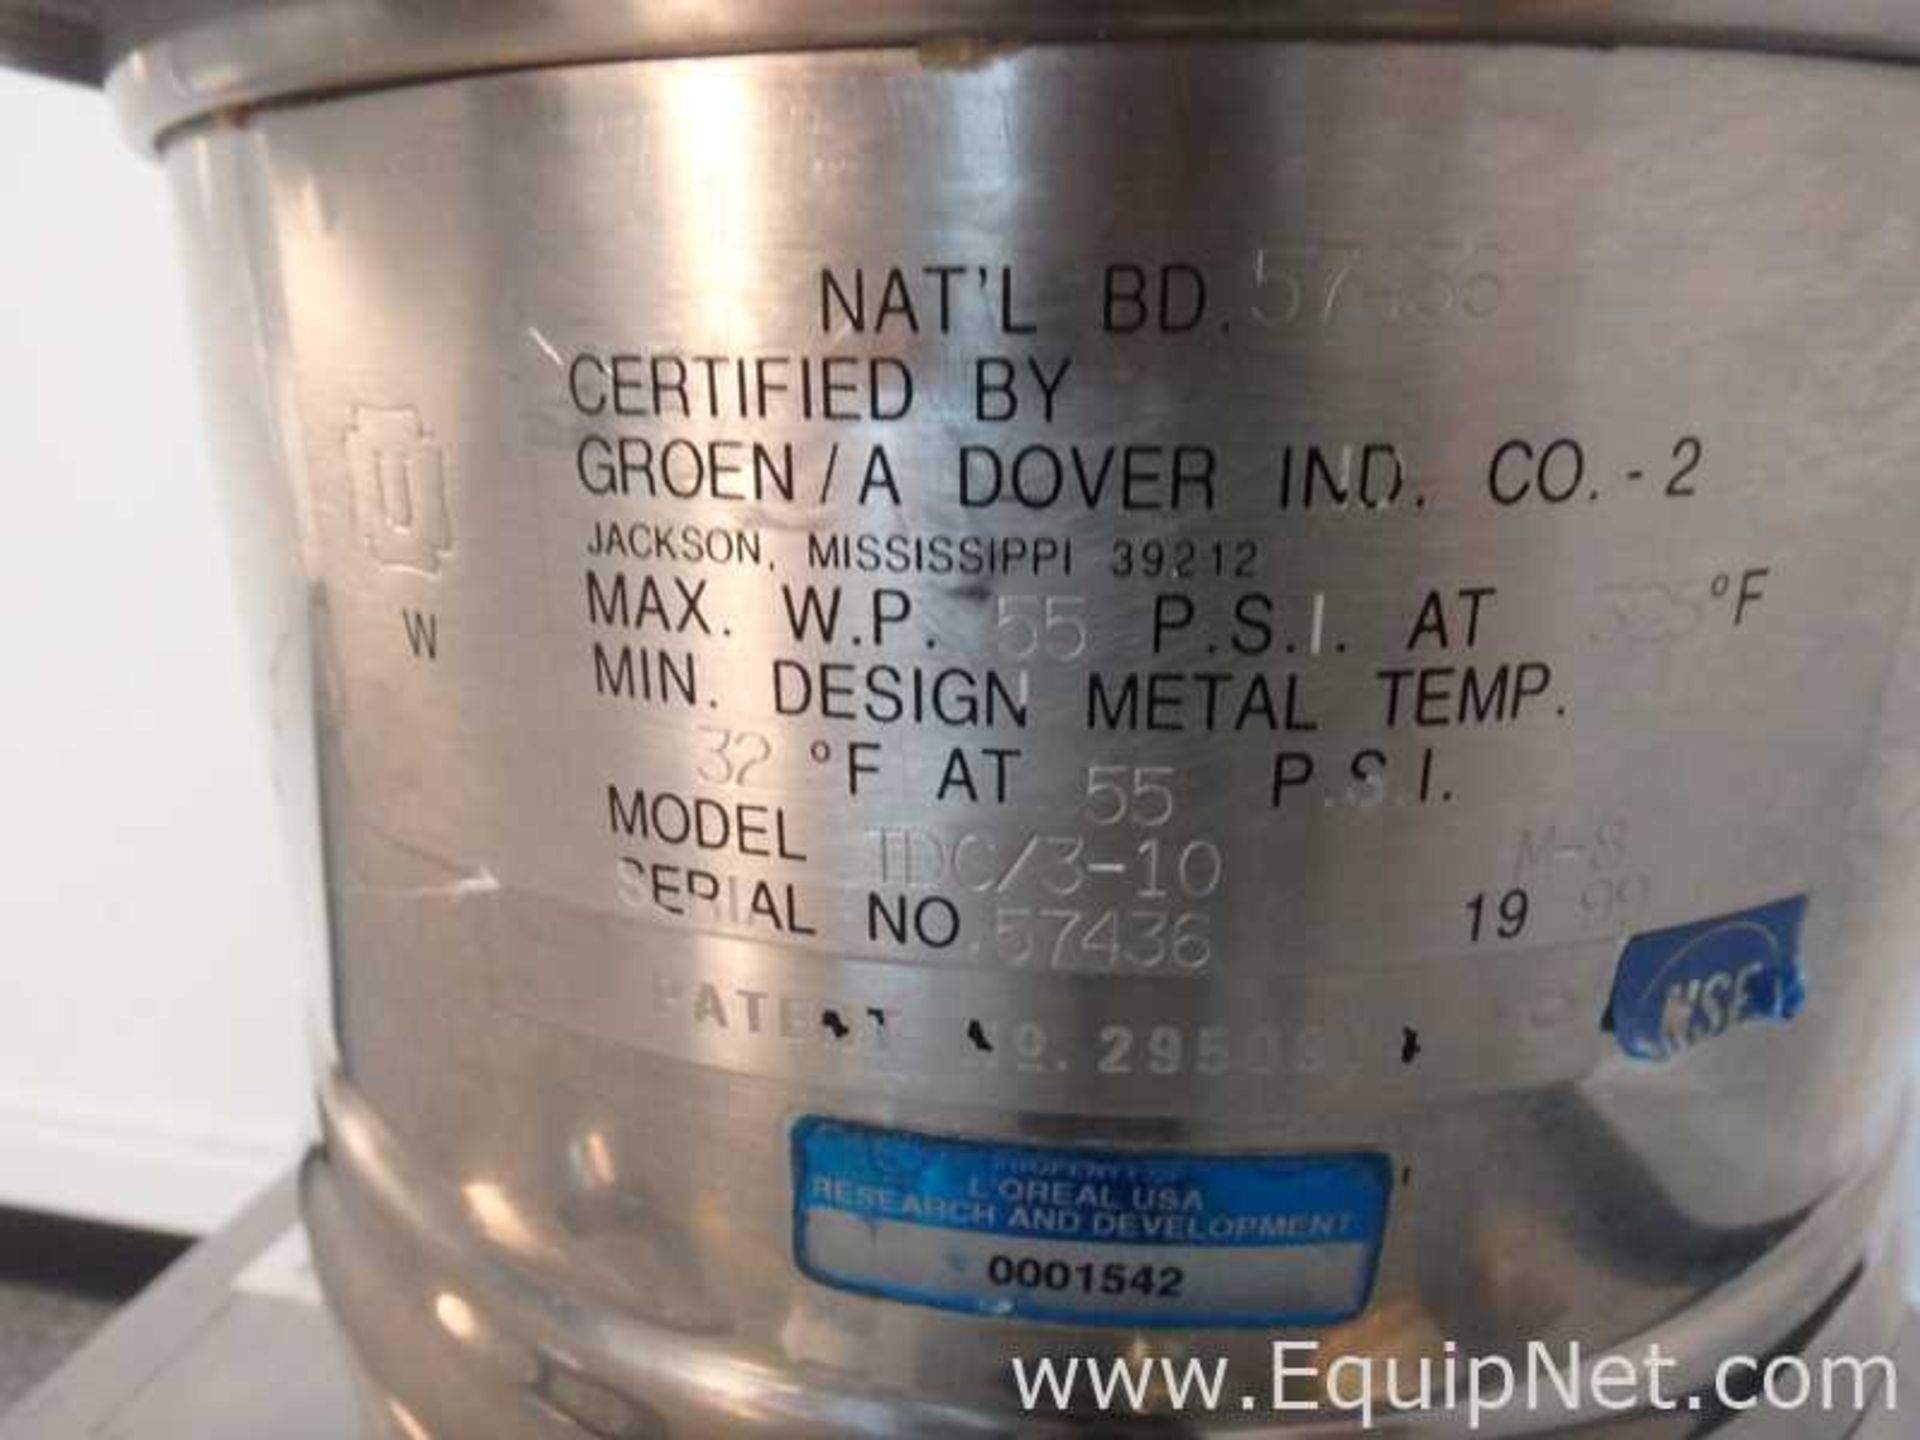 DESCRIPTION: Groen TDC/3-10 Stainless Steel Jacketed 10 Quart Jacketed Kettle10 quarts/2.5 gallon - Image 6 of 11